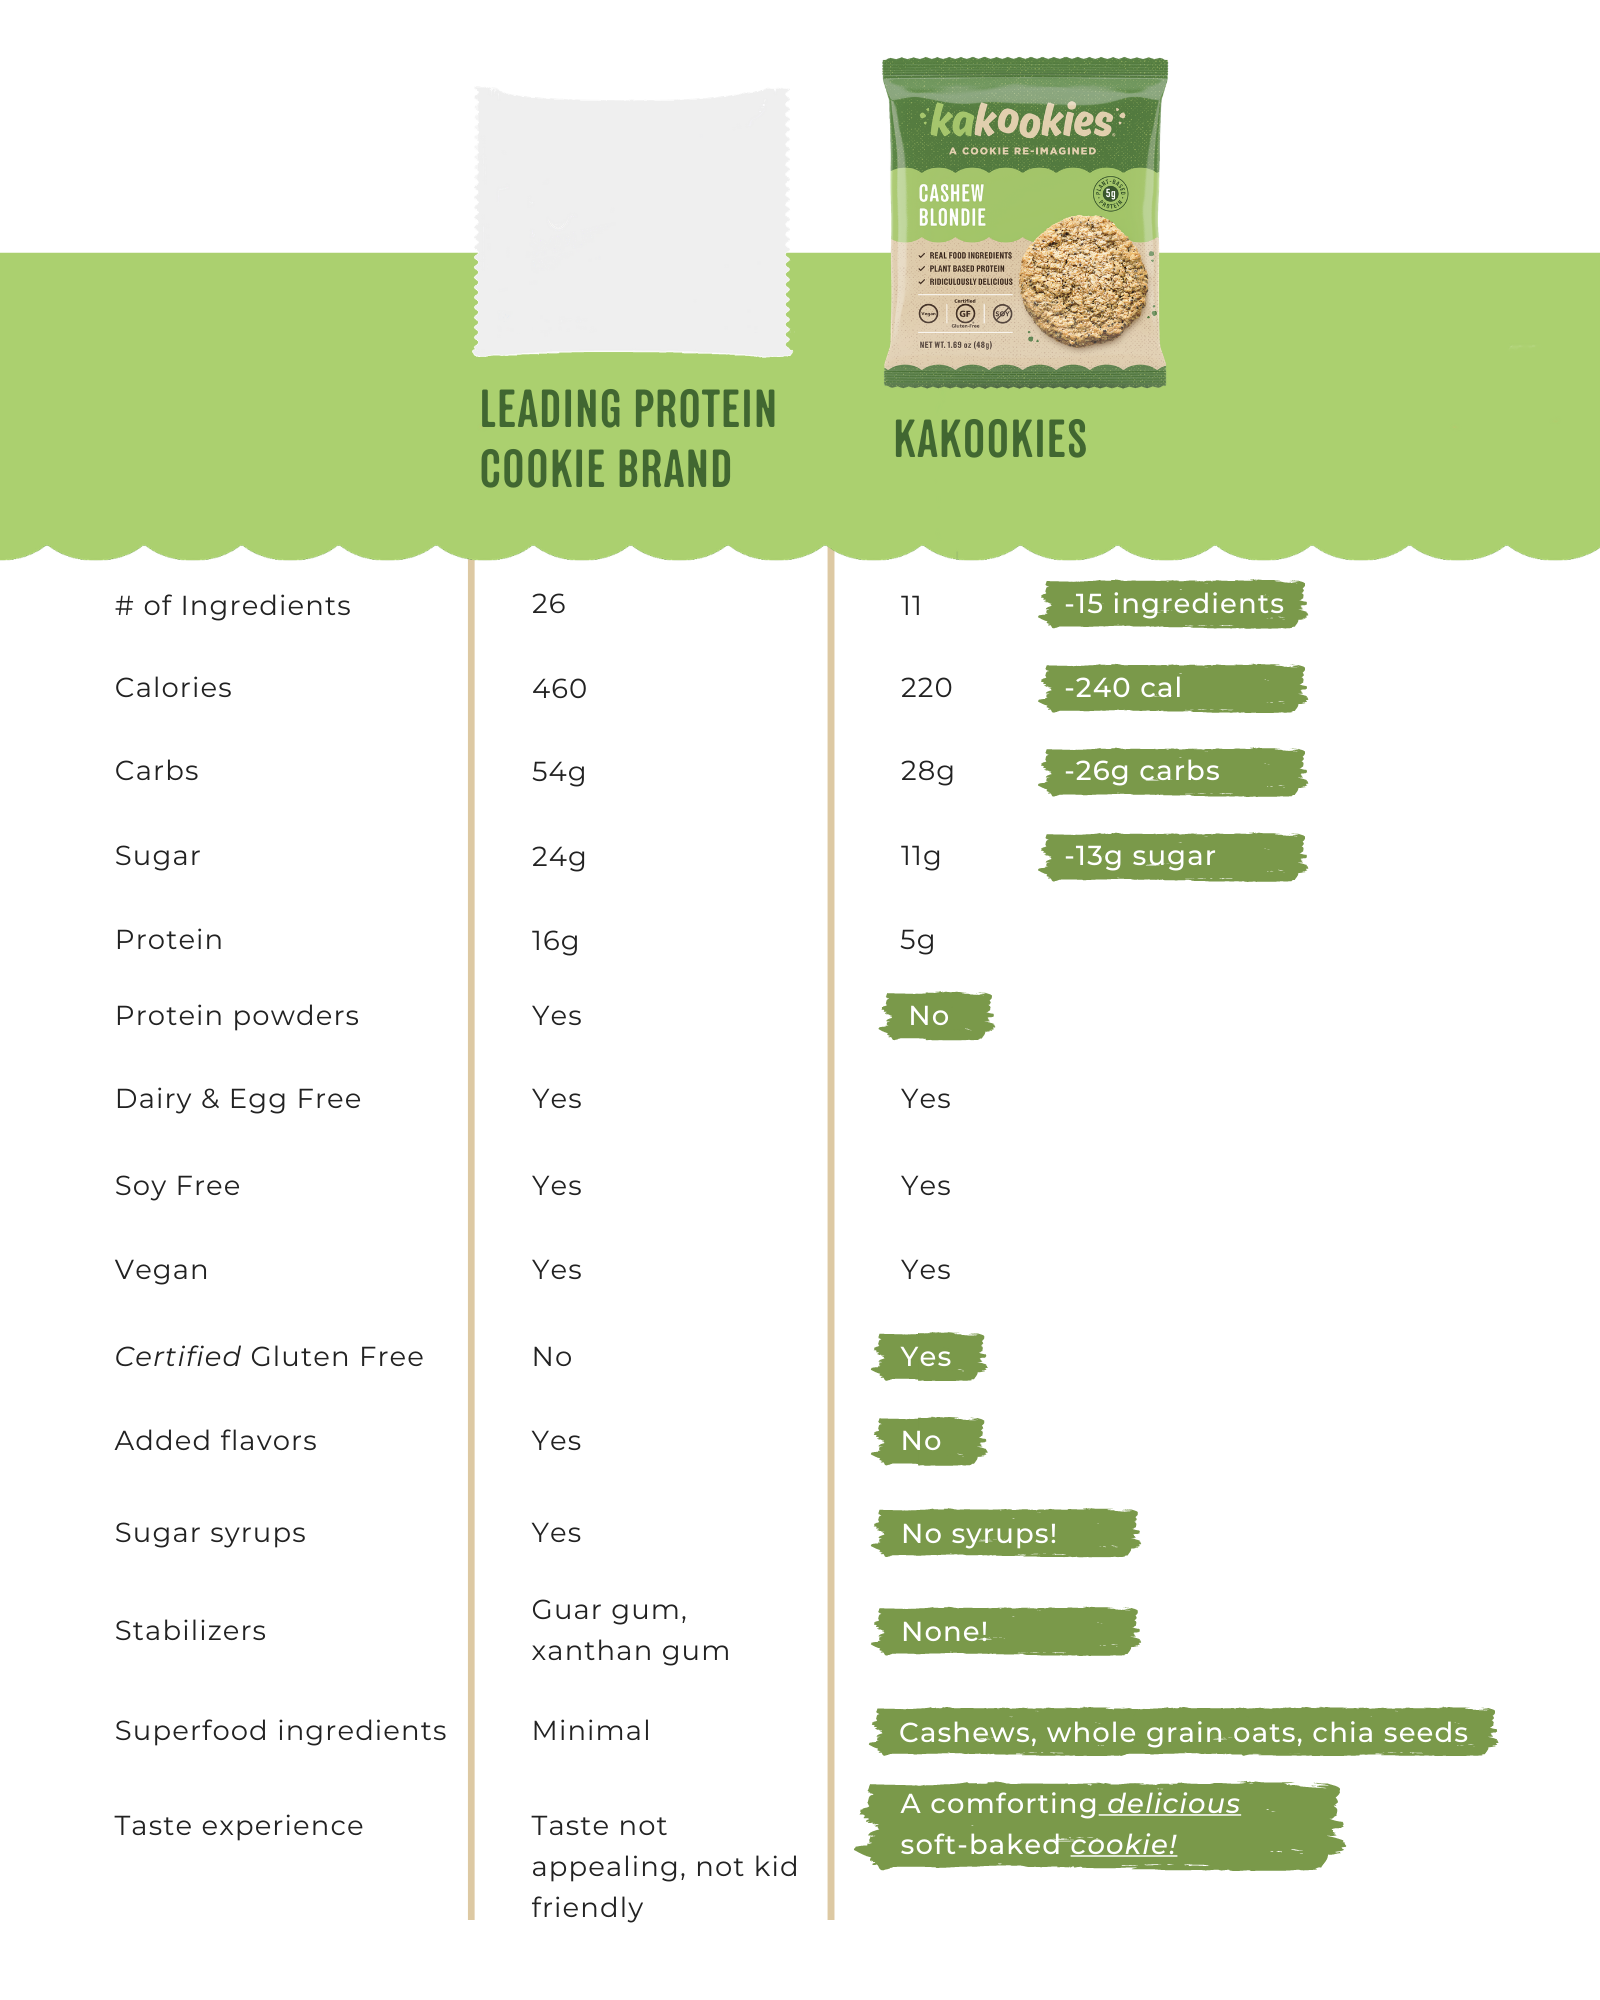 nutritional comparison to leading protein cookie